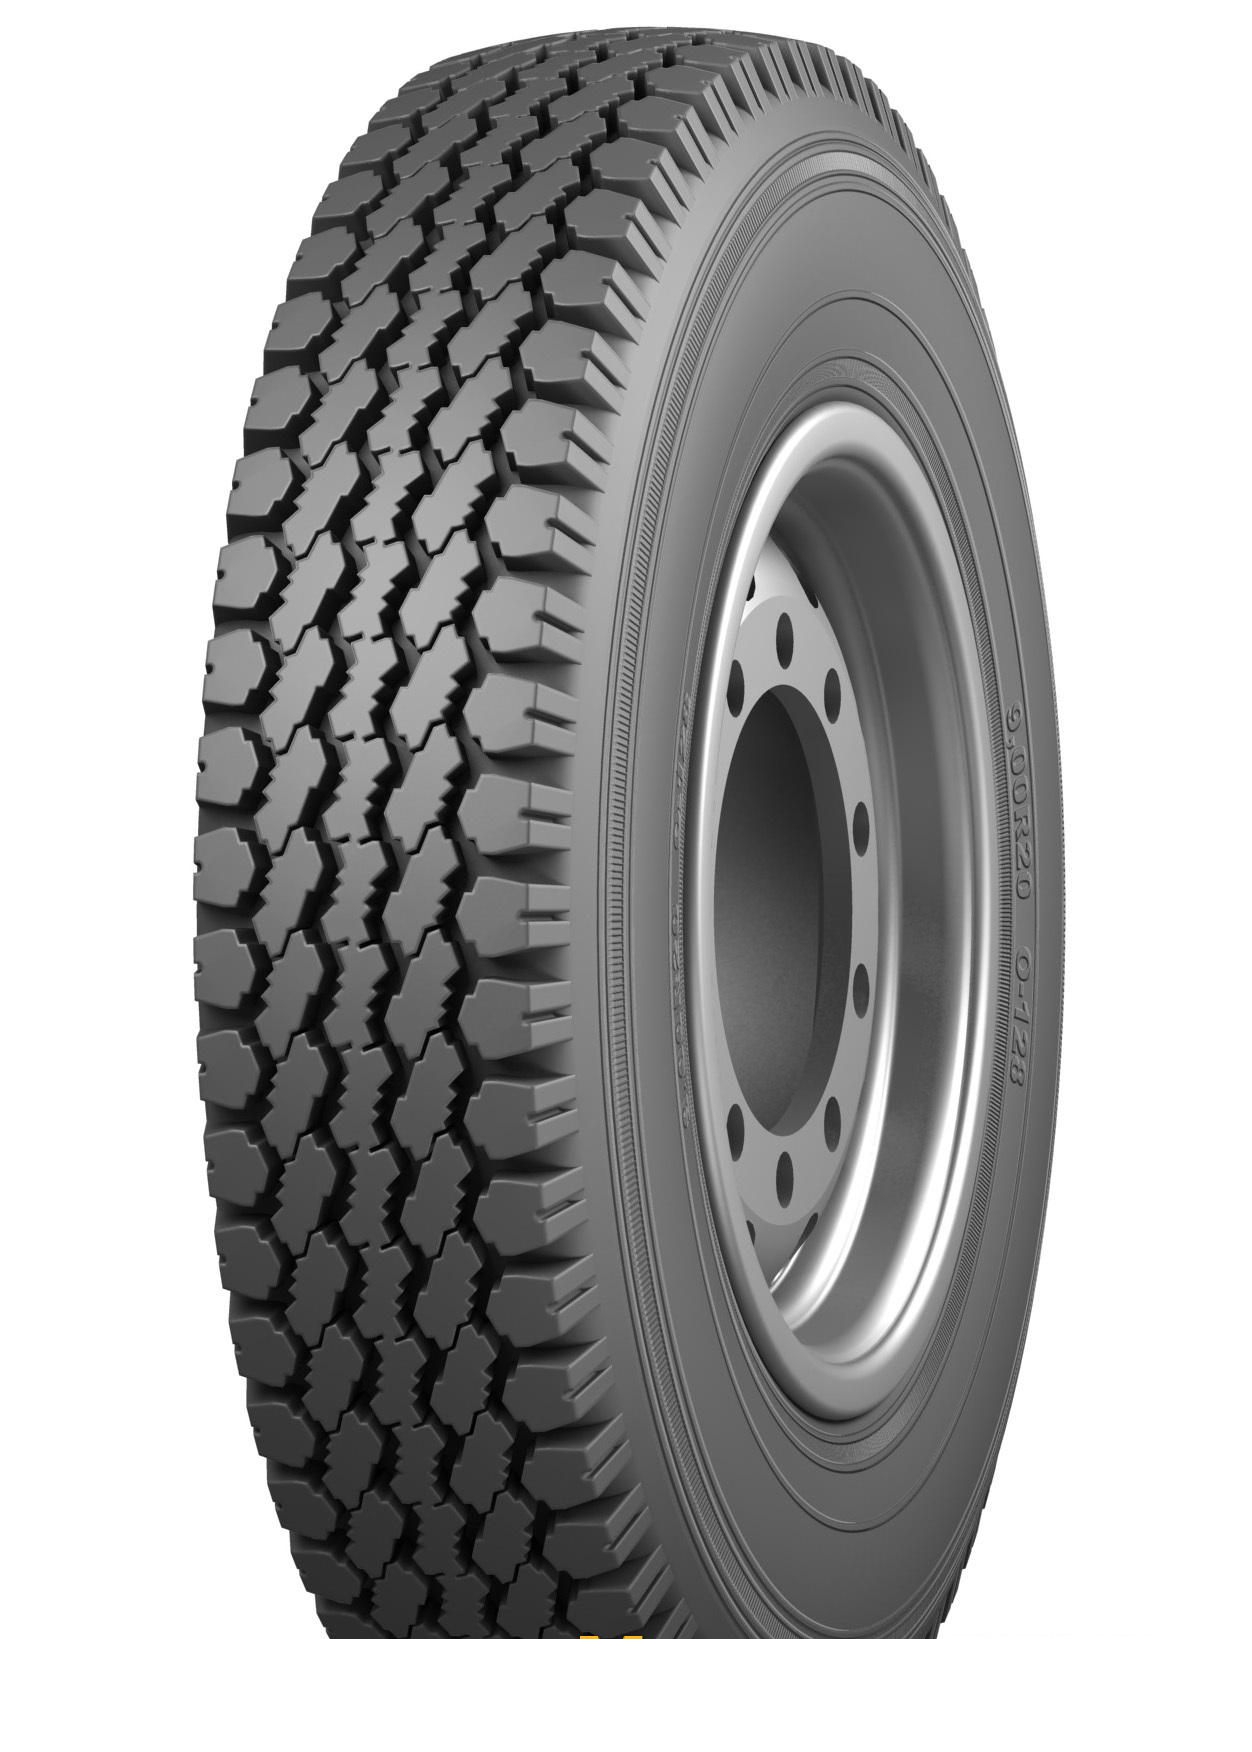 Truck Tire Omsk O-128 9/0R20 136J - picture, photo, image